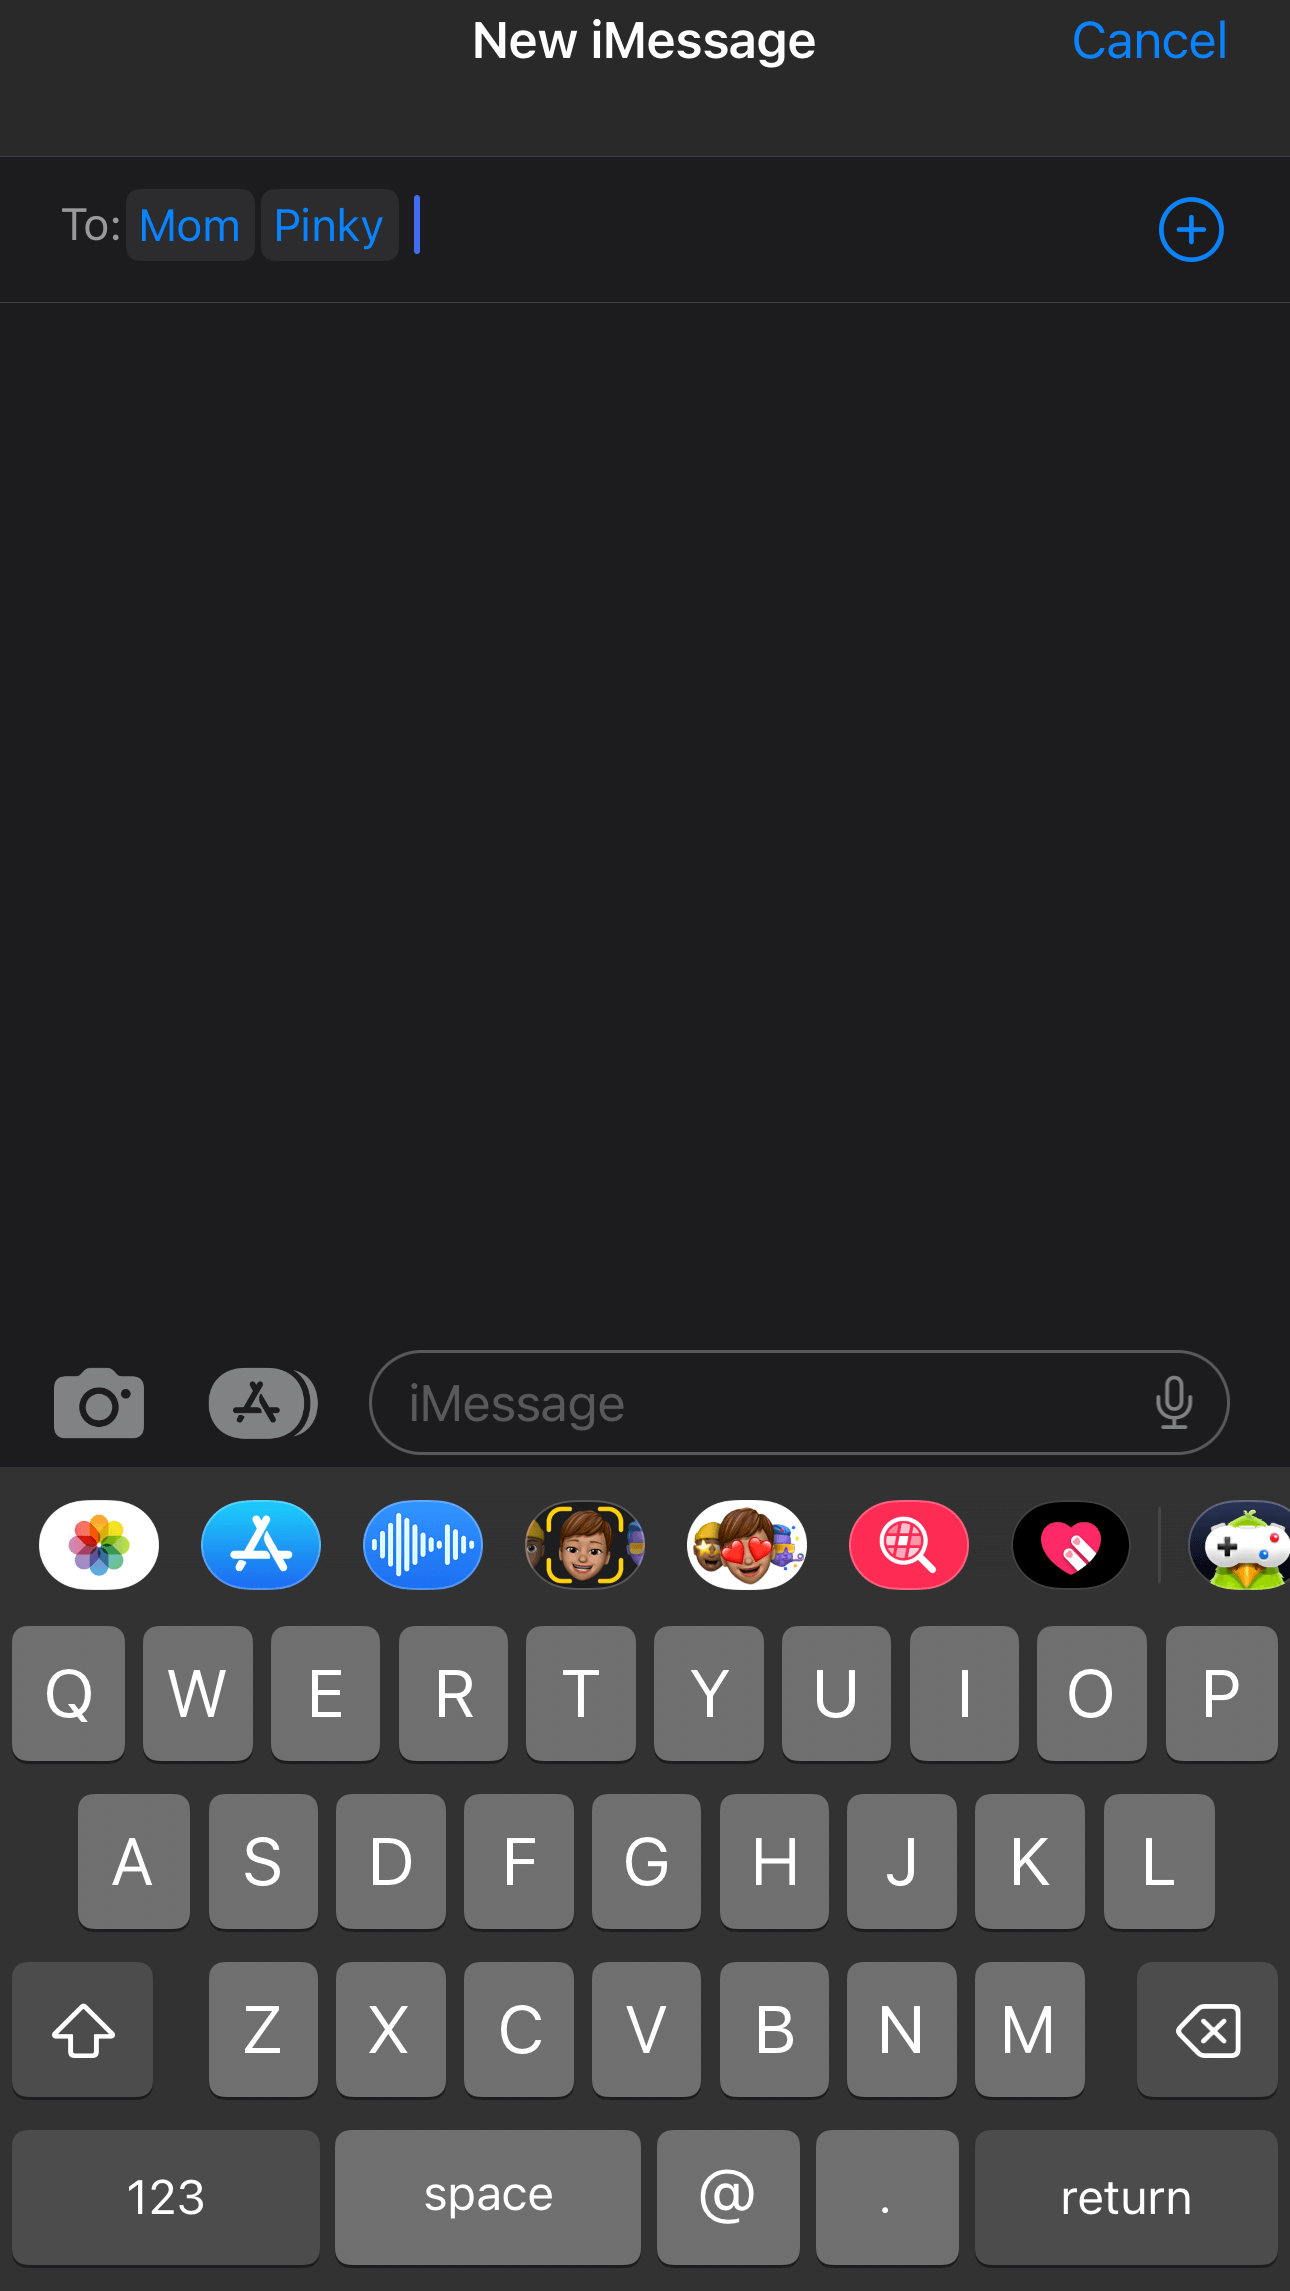 Start a new group chat with your friends on iMessage